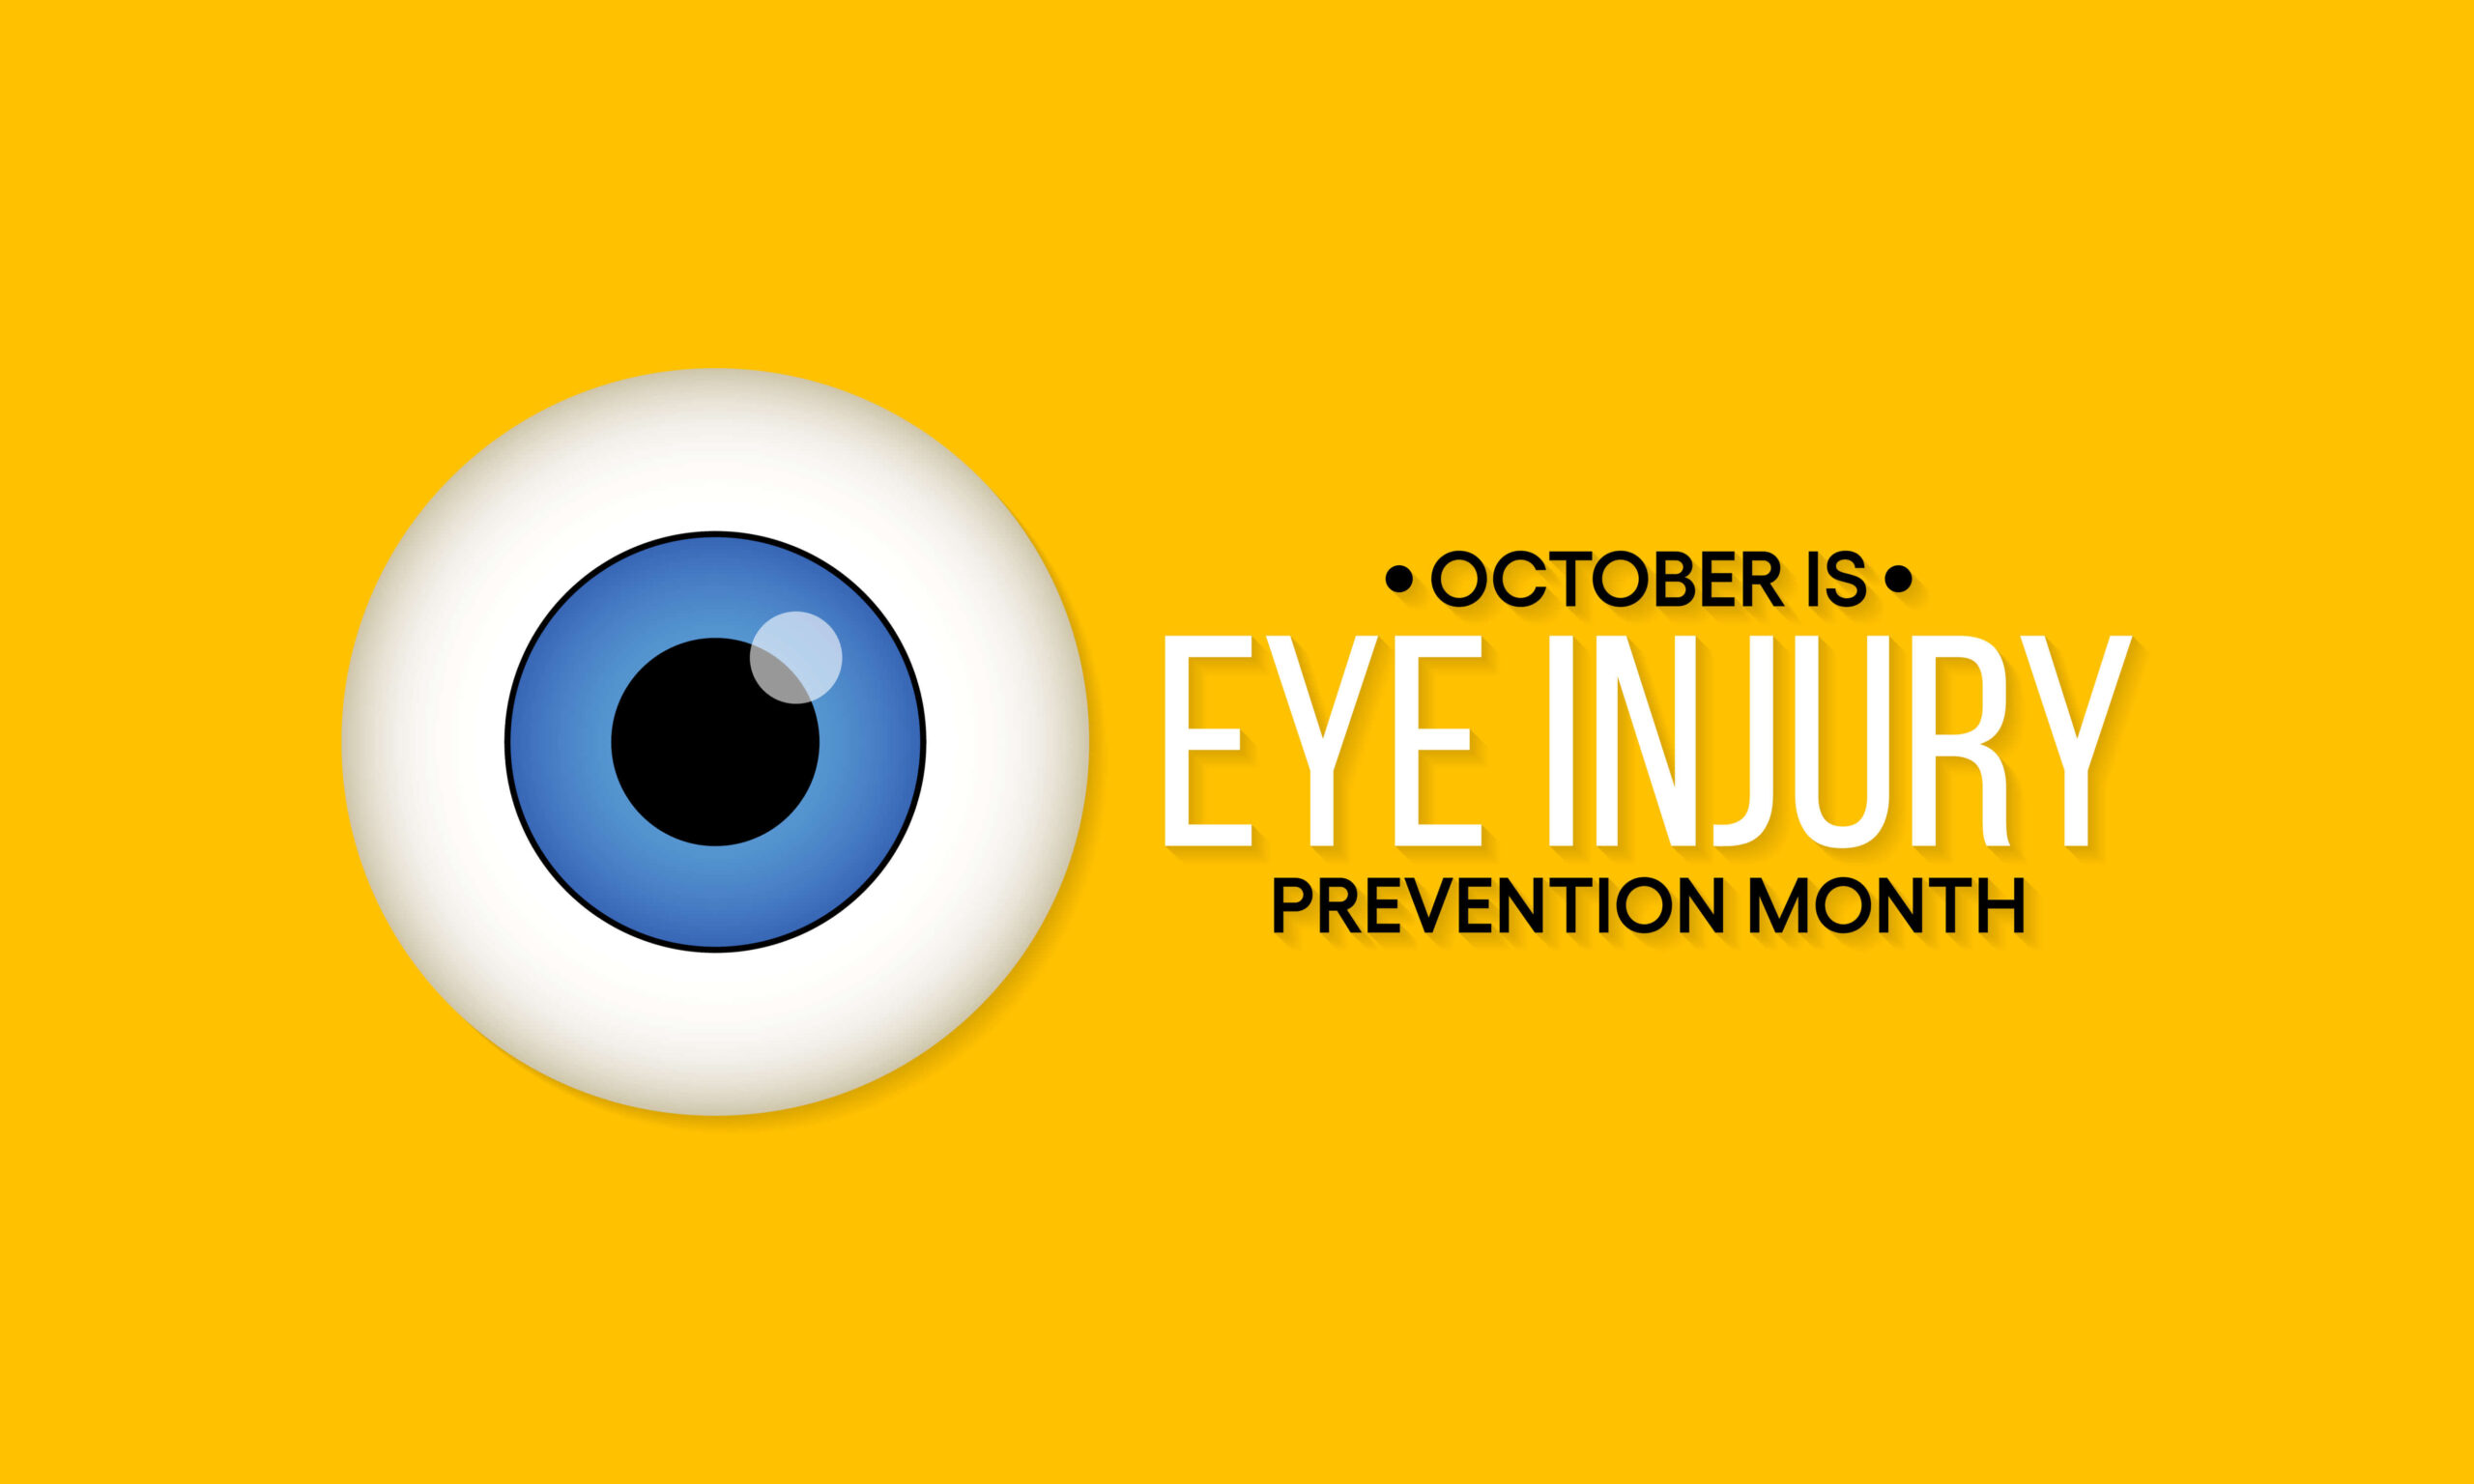 Vision2020: Our guide to eye injury prevention